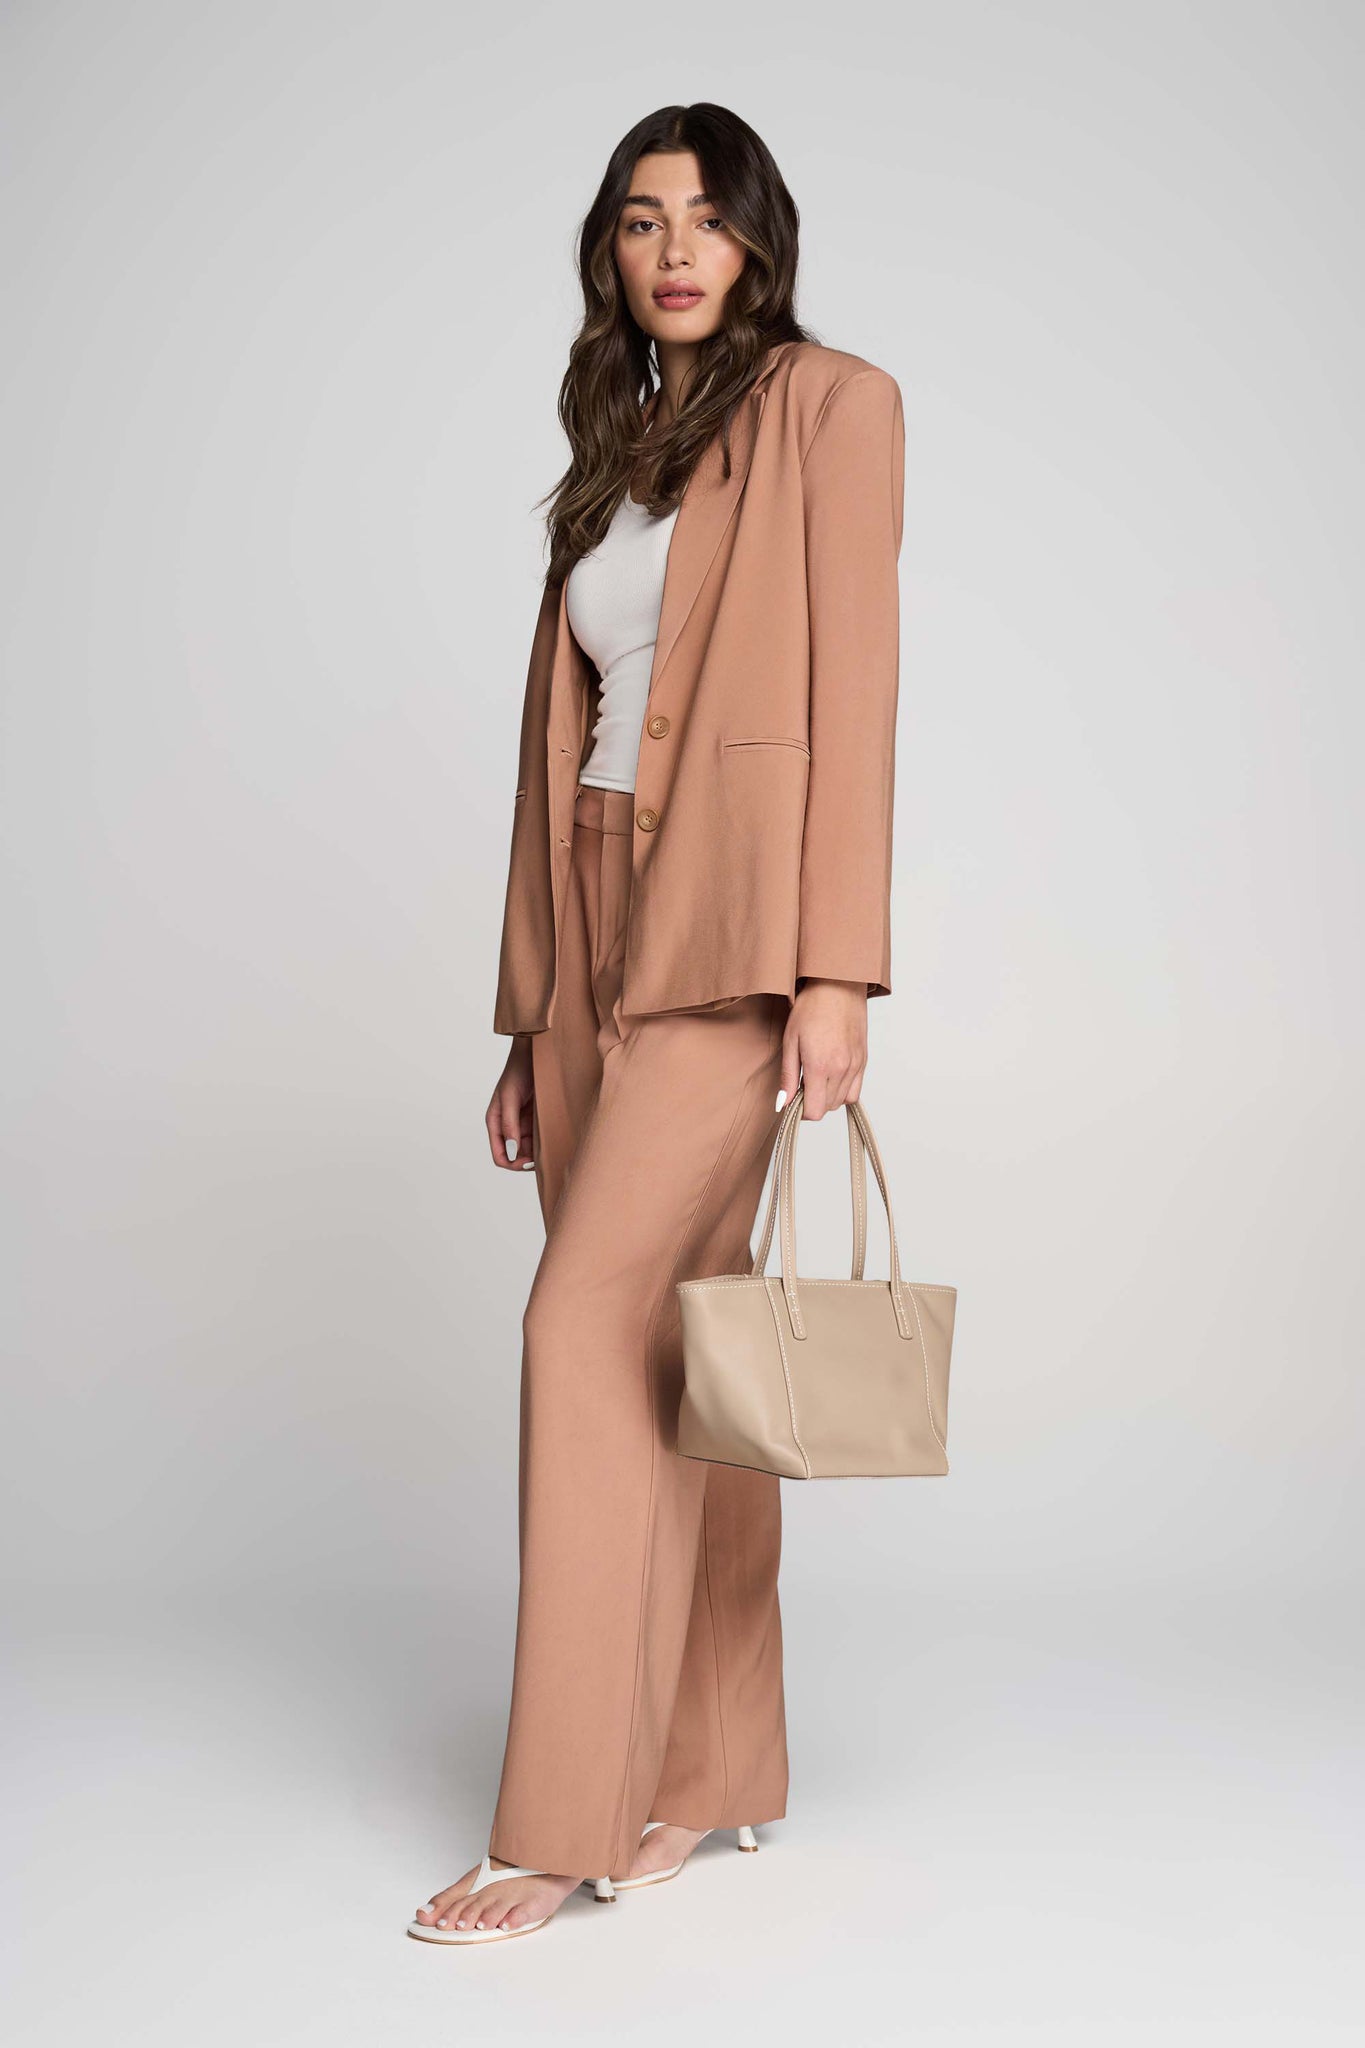 Casual Pure Color Loose Pants #Pure, #SPONSORED, #Casual, #Color, #Pants  #Adver